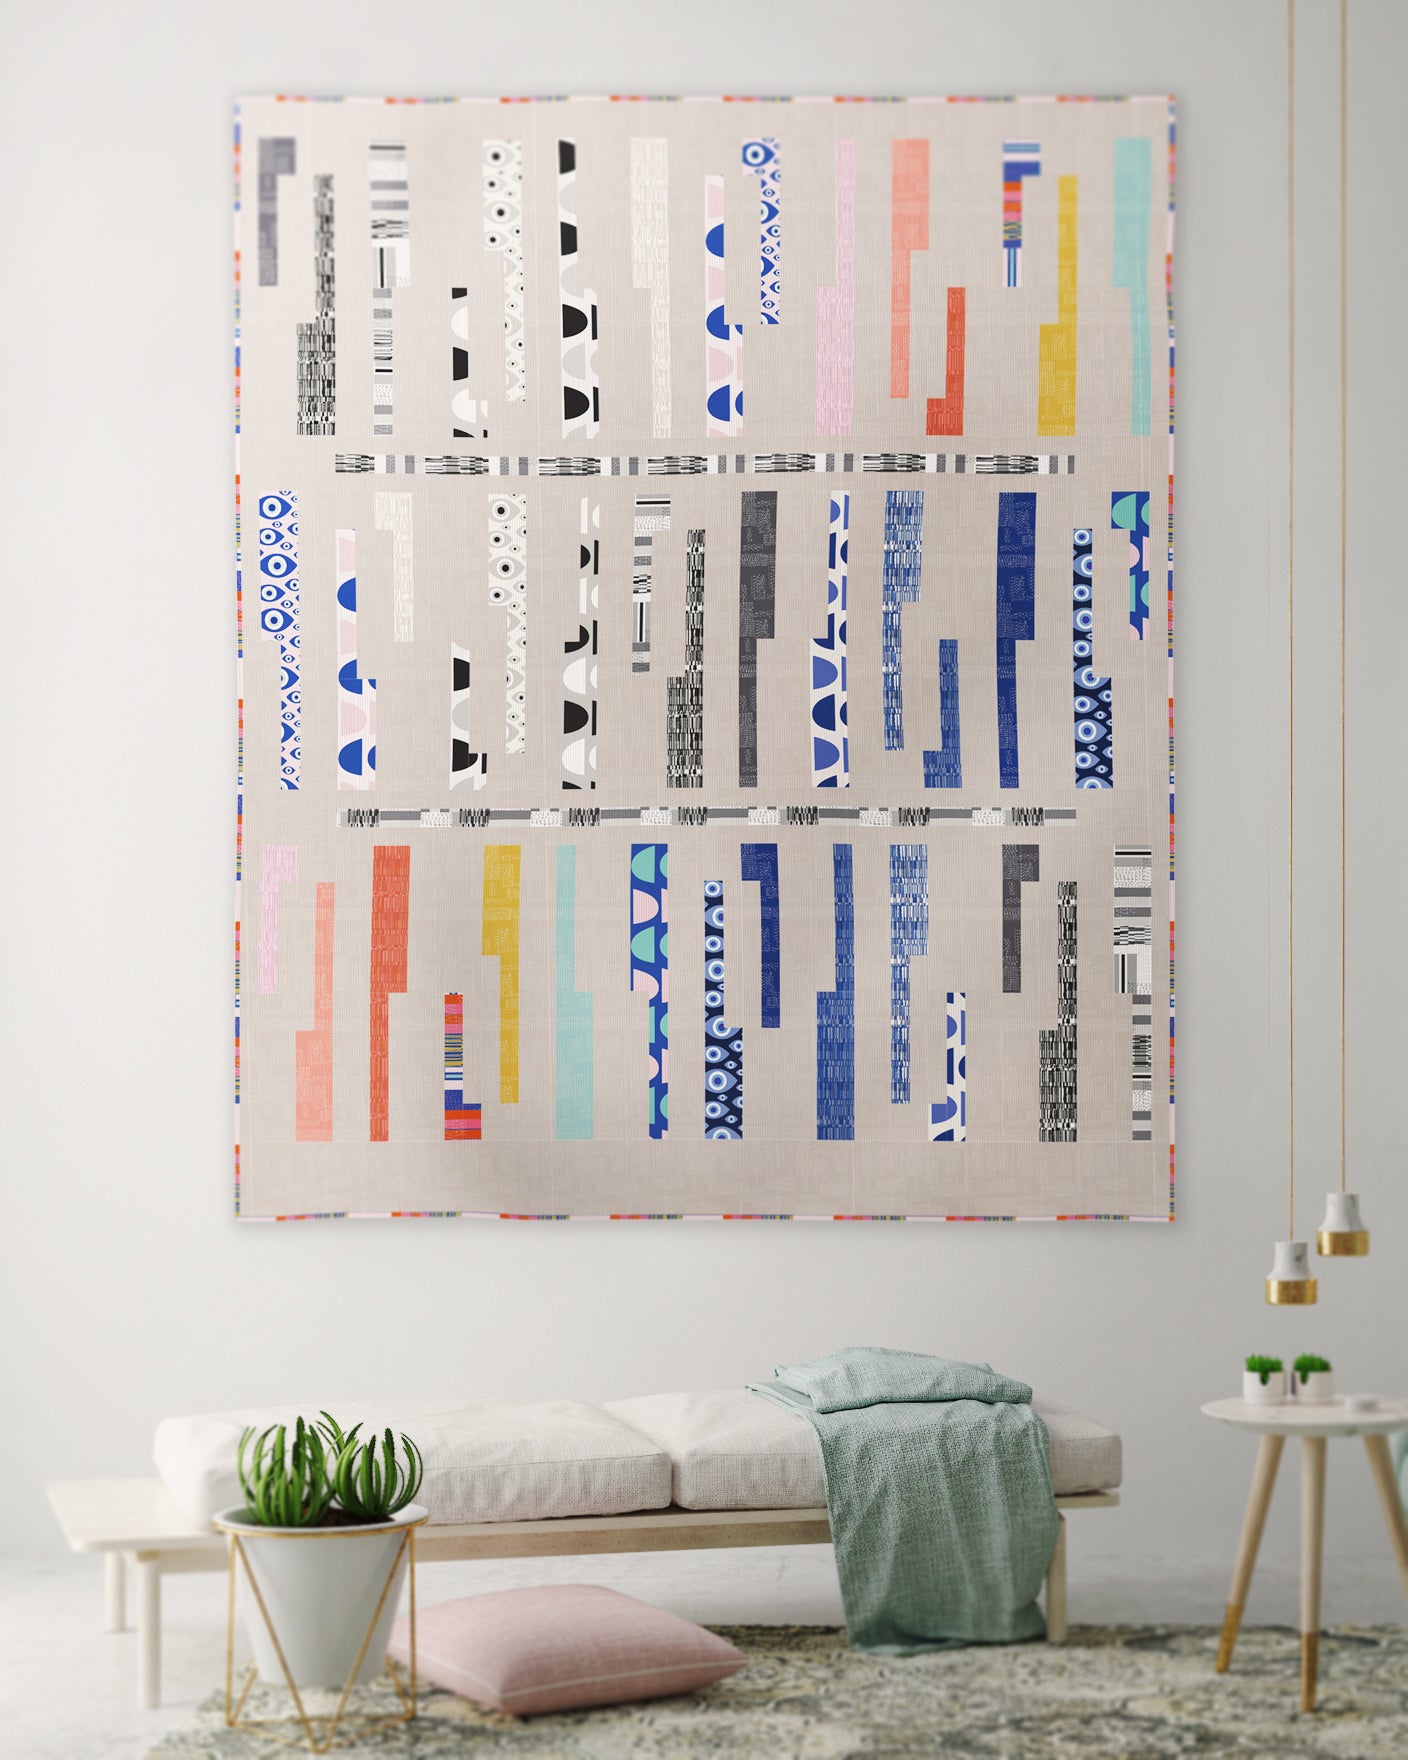 Quilt Pattern - Broken Codes by Heather Black of Quiltachusetts